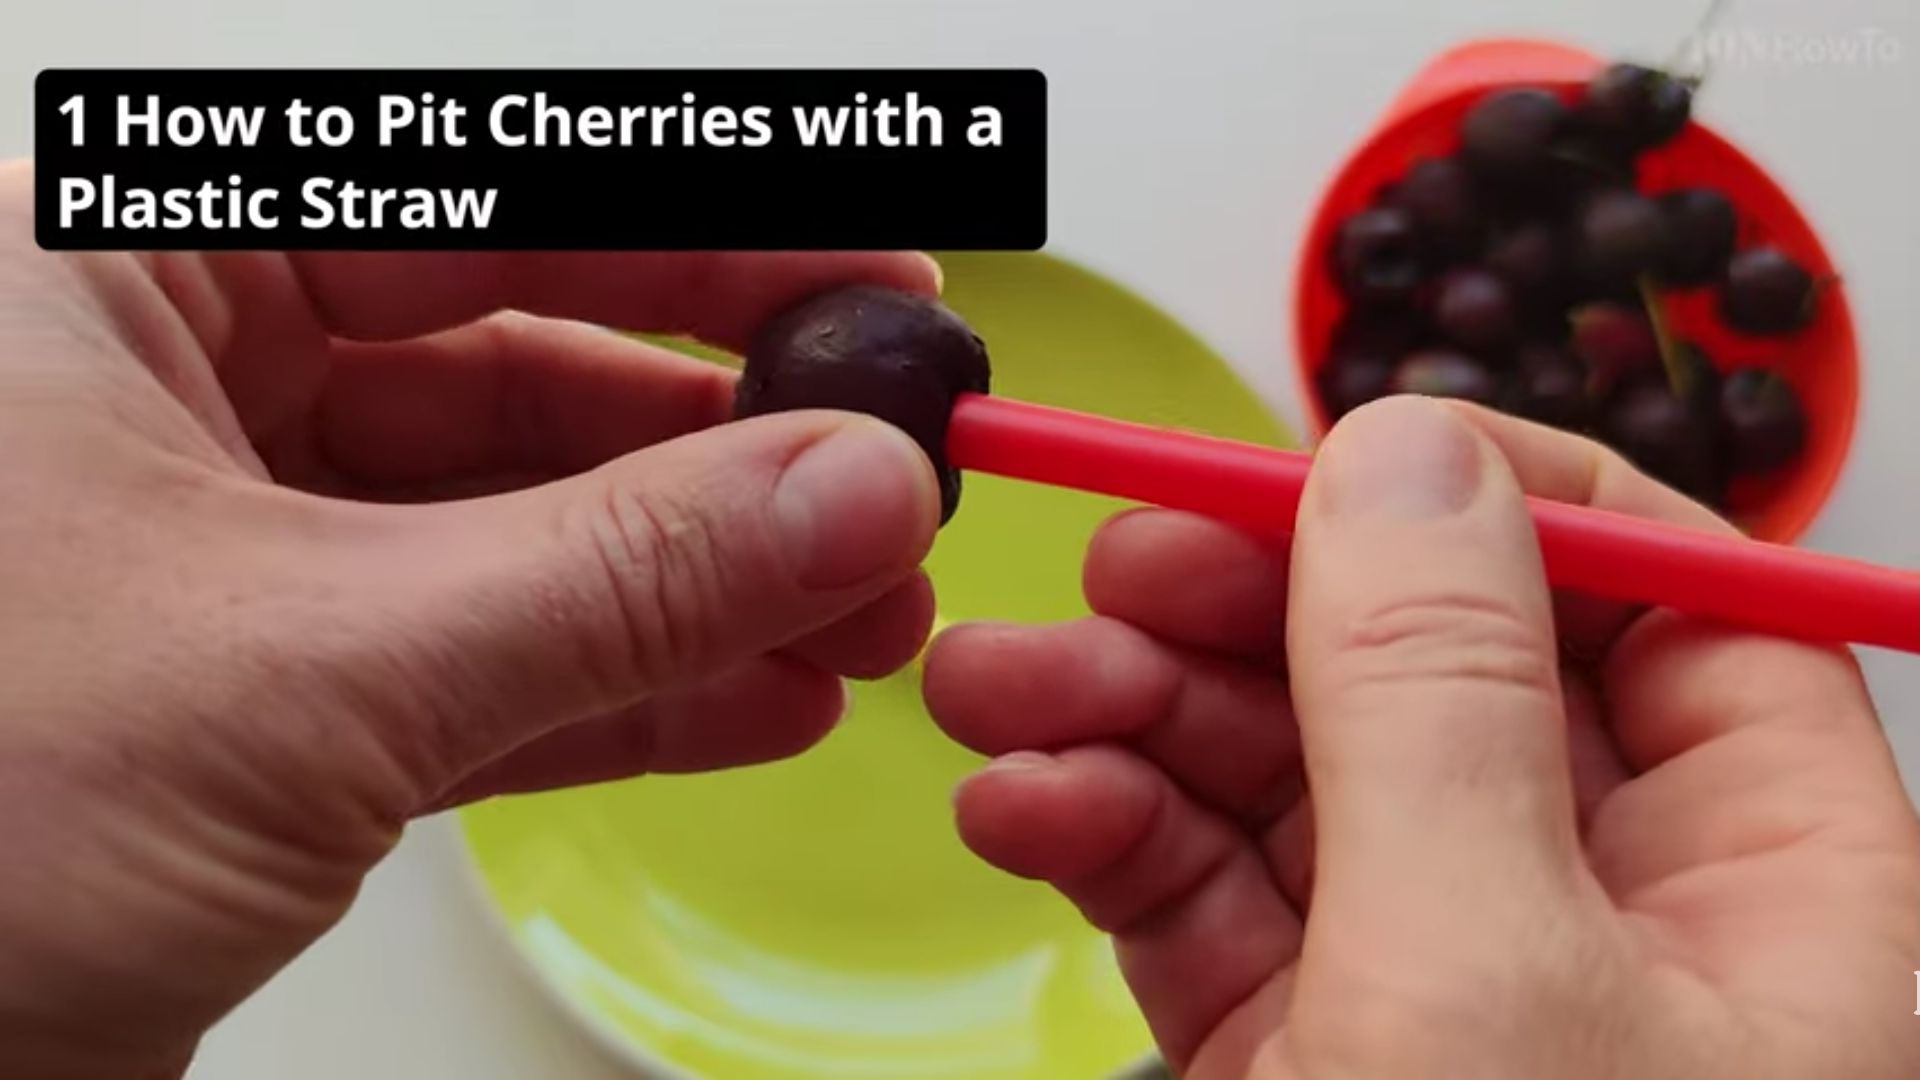 How to pit cherries with a plastic straw